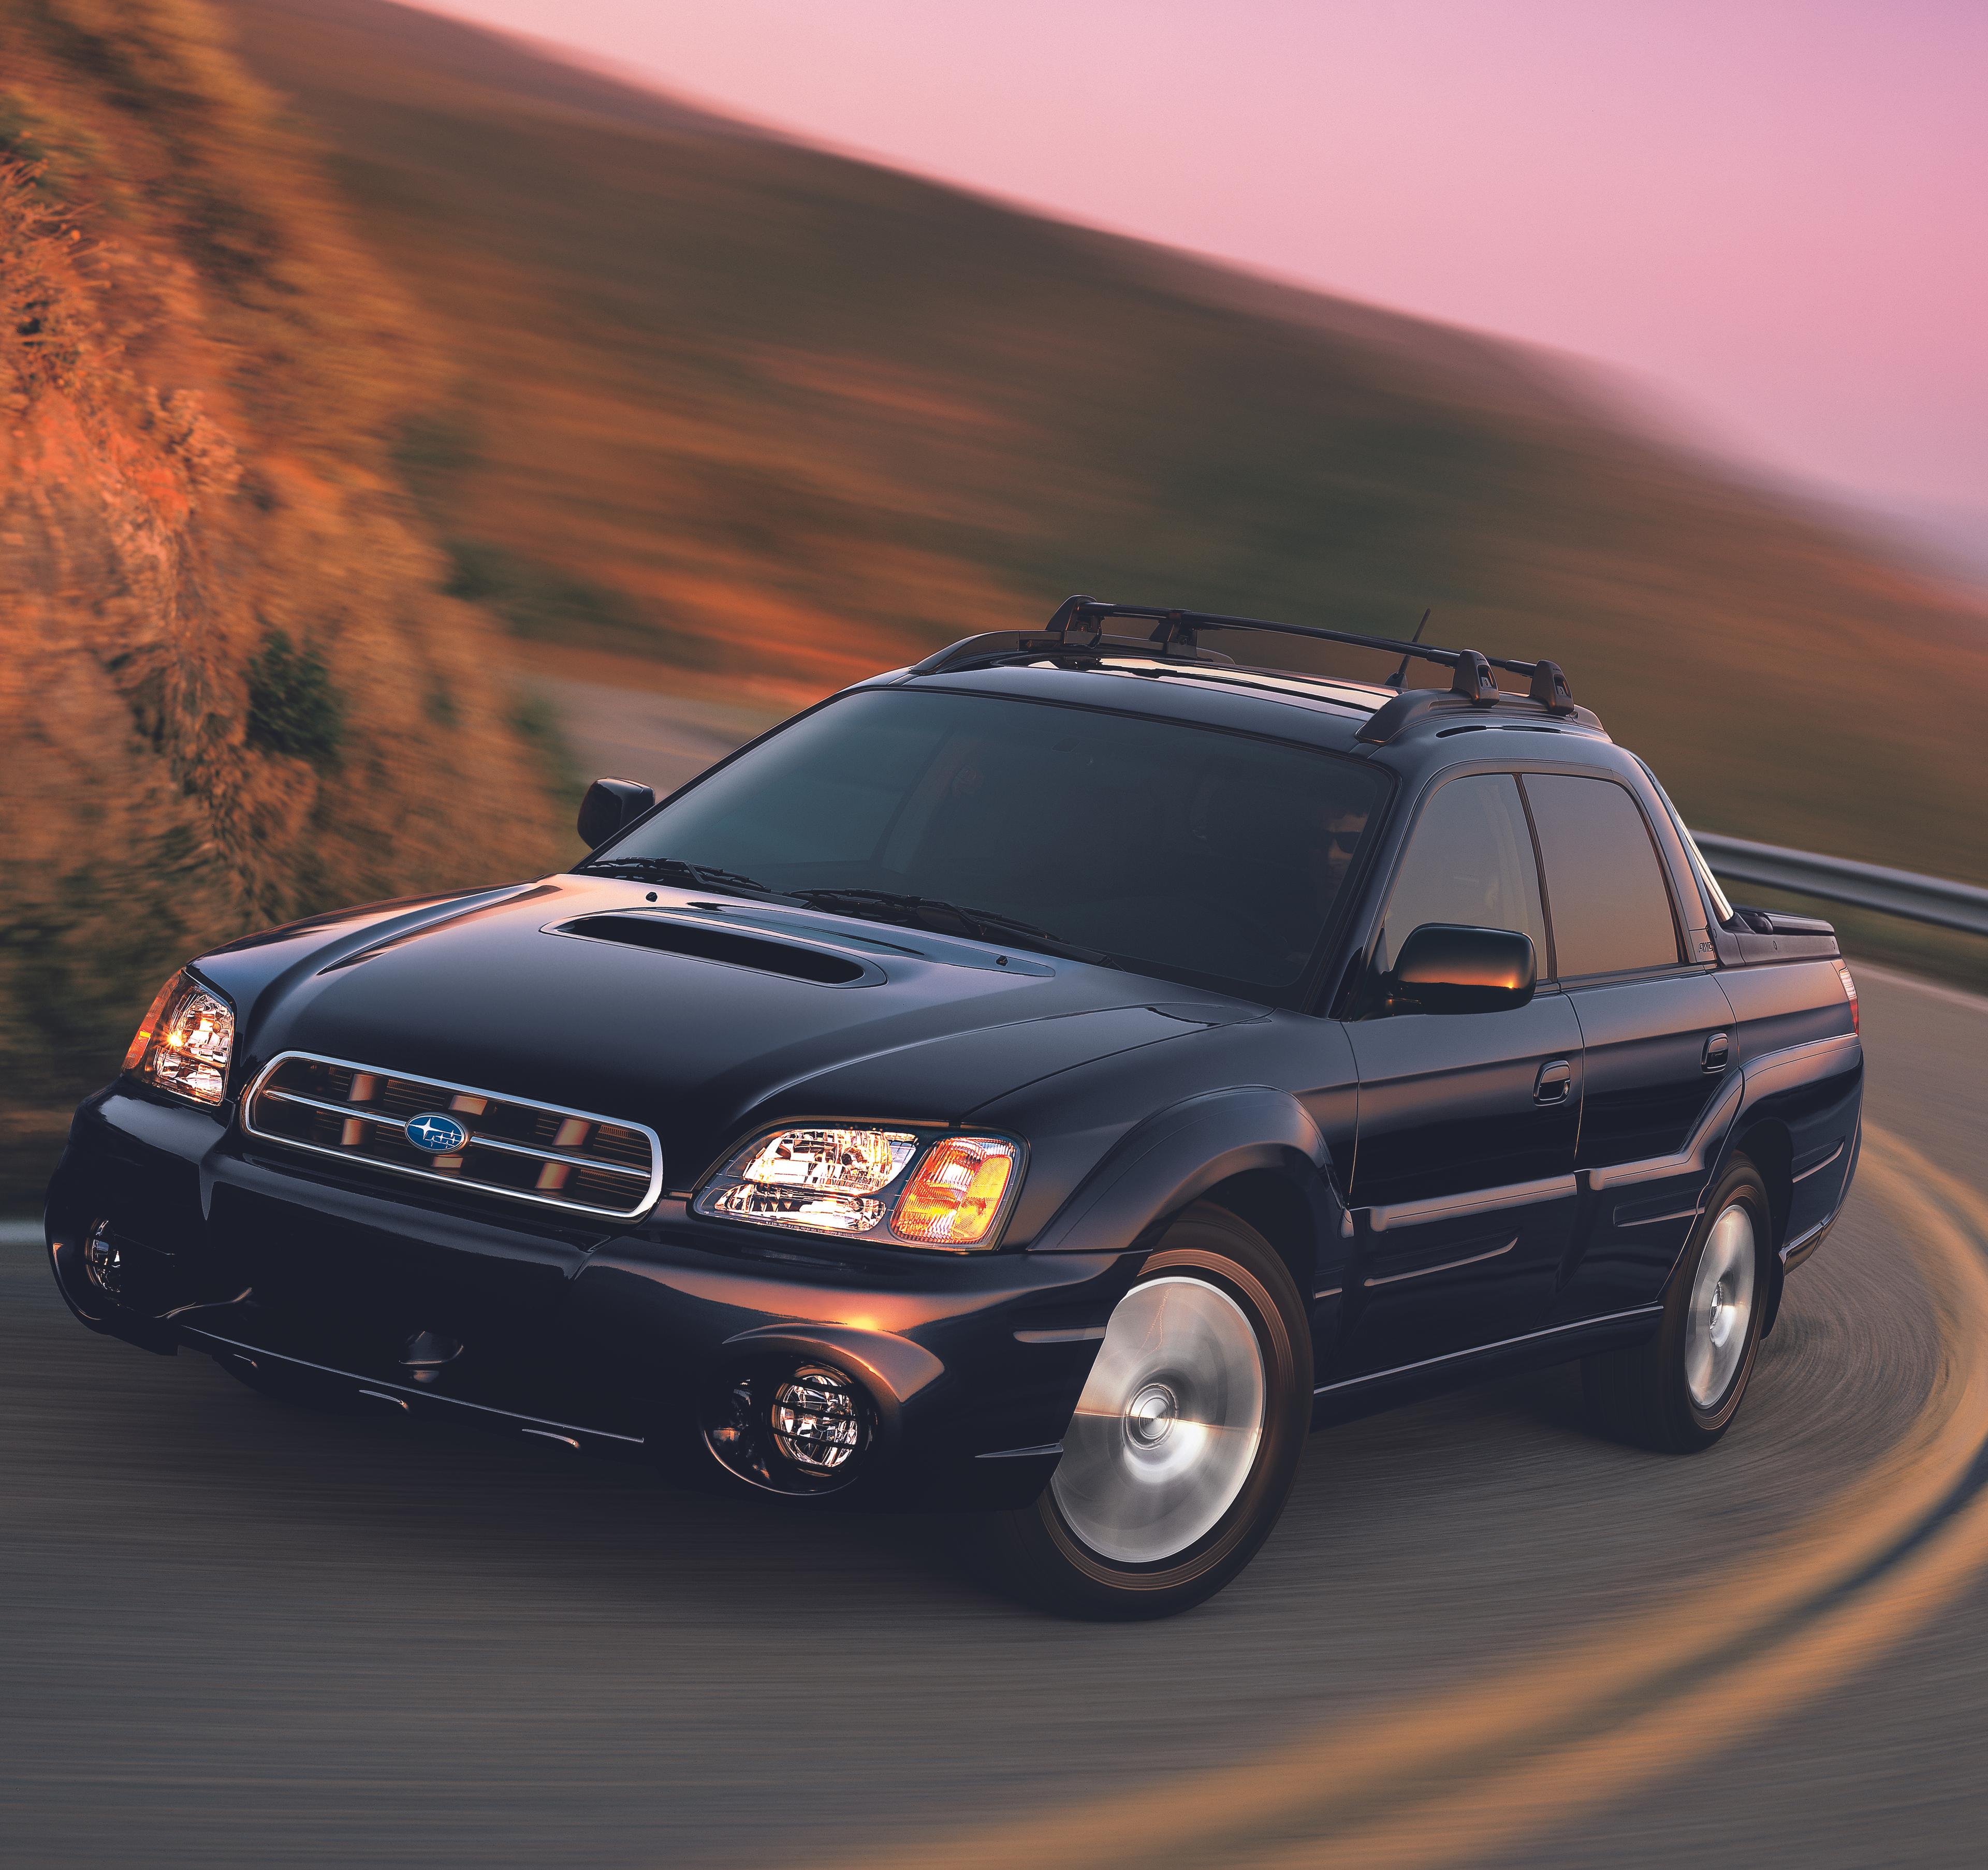 Fans of the Subaru Baja are always looking for hints of its return.